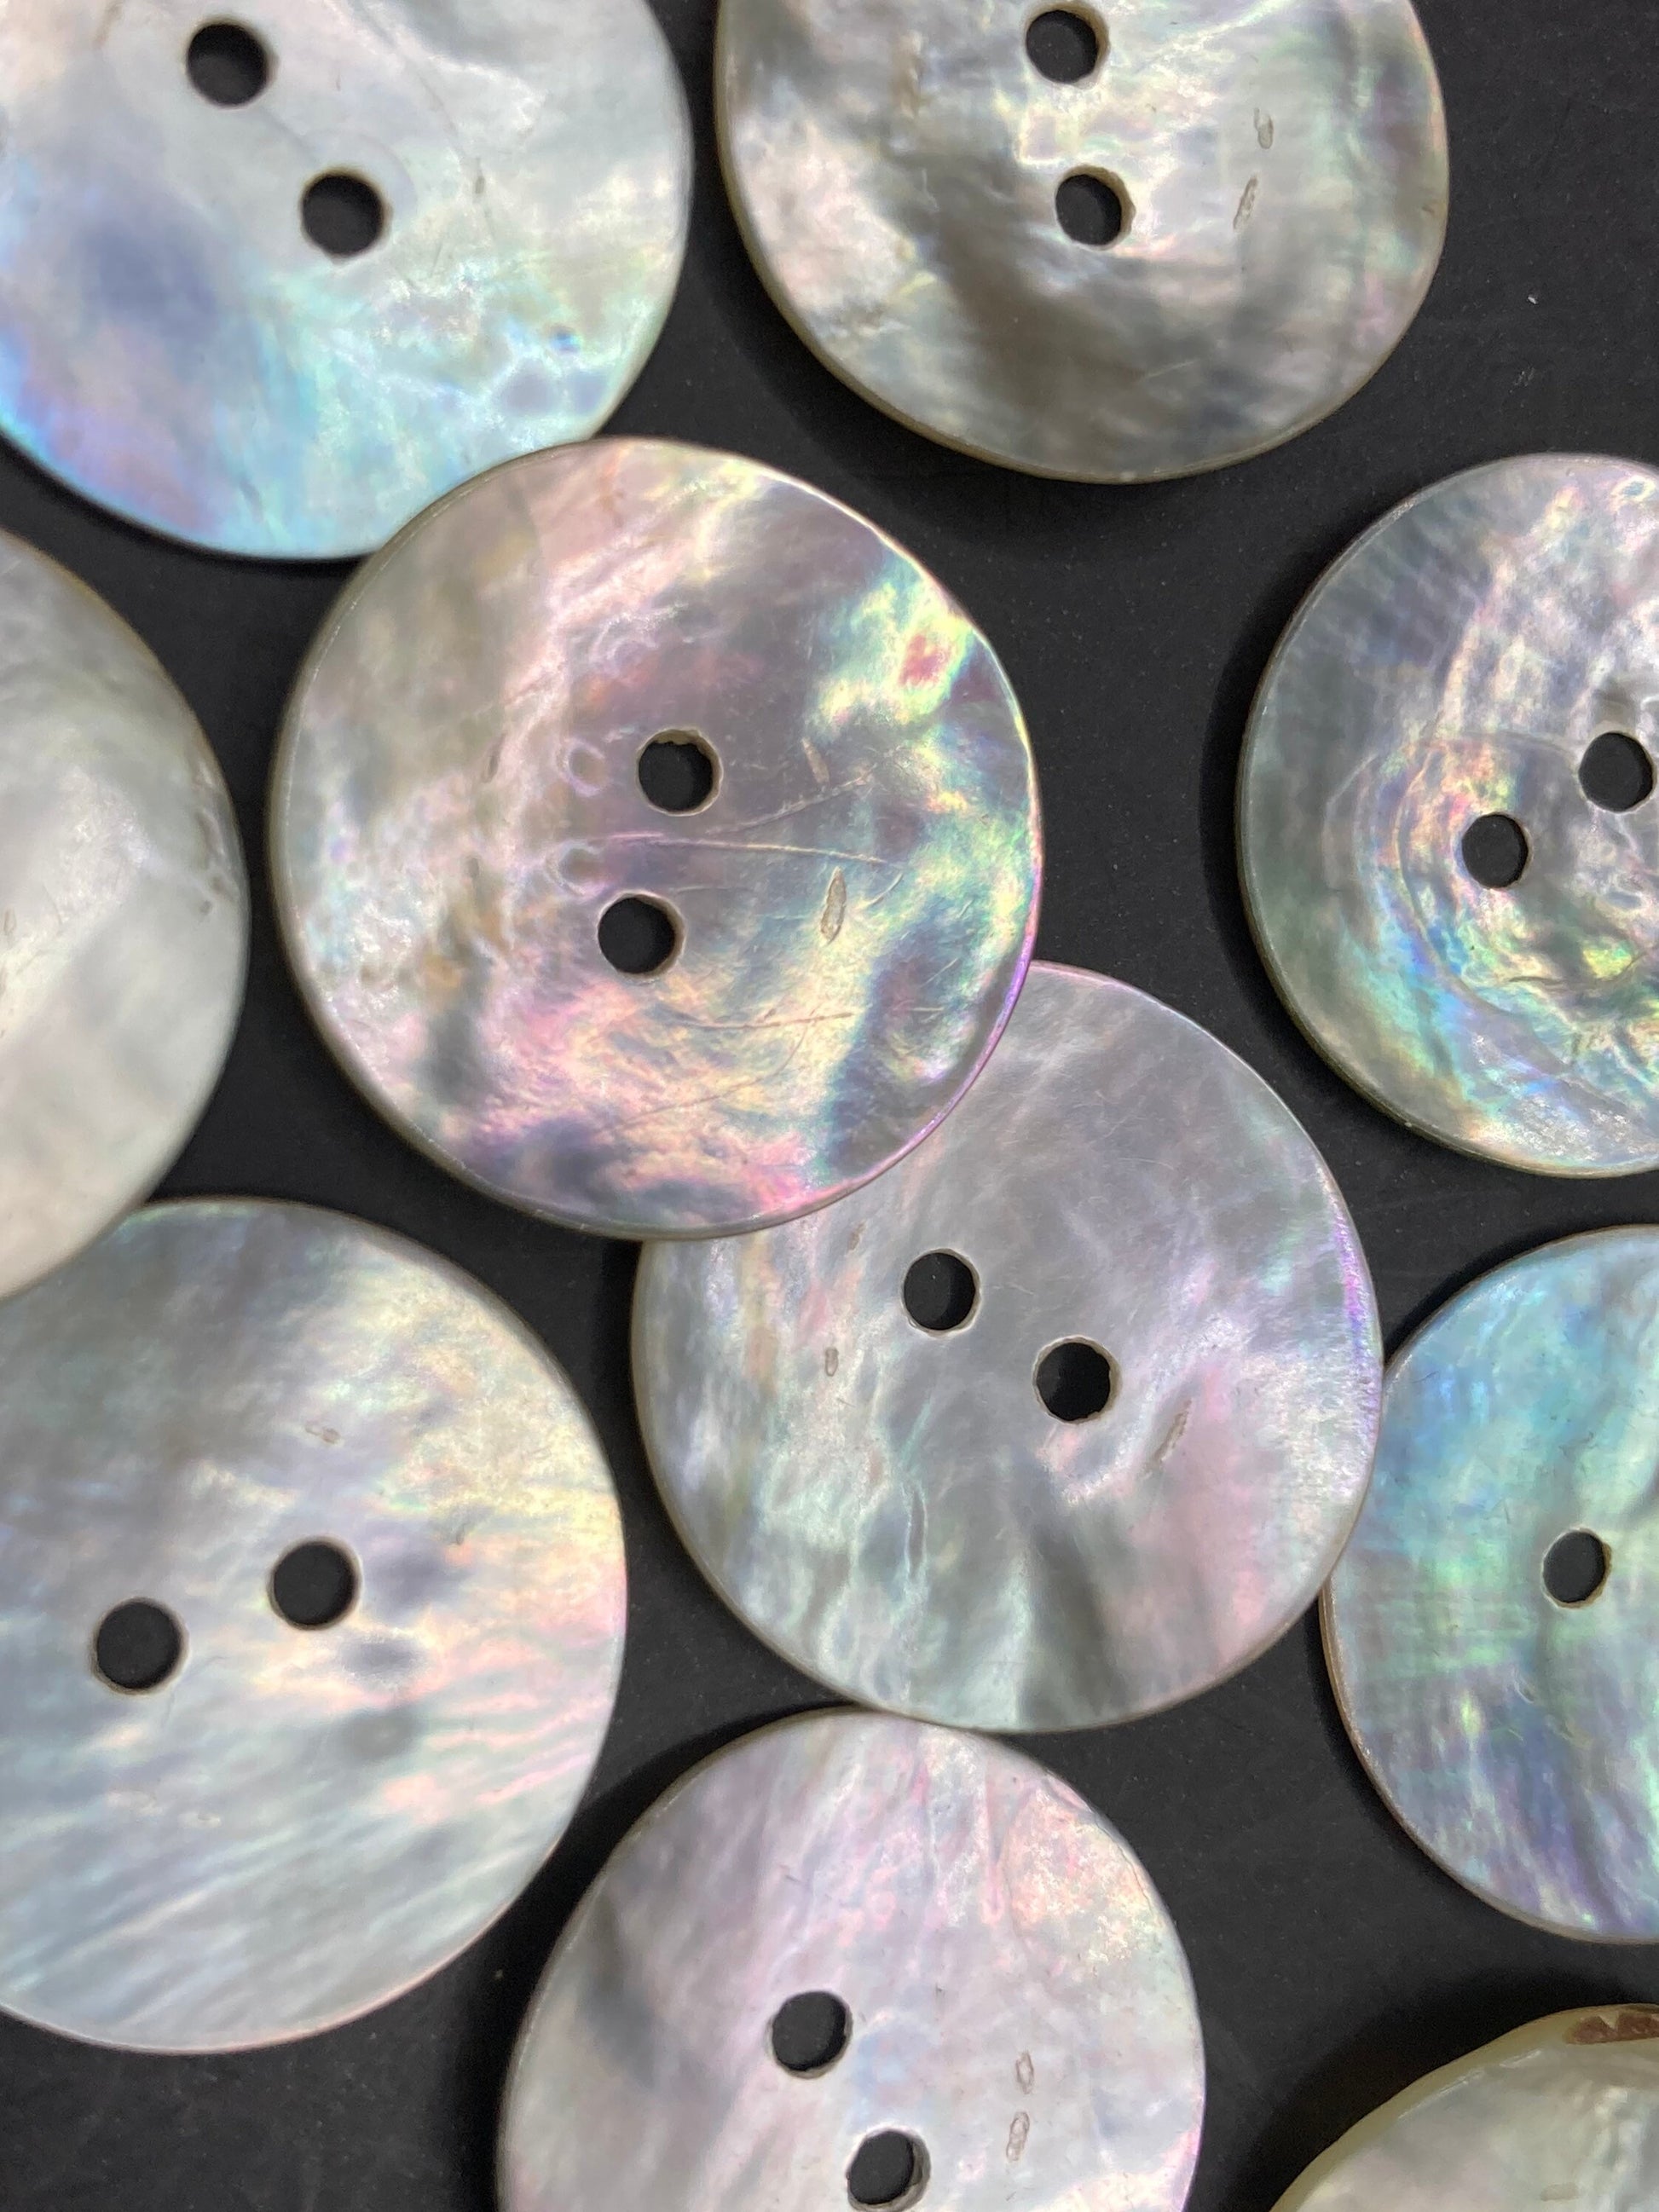 10 x 20mm large round natural MOP Mother of Pearl Buttons